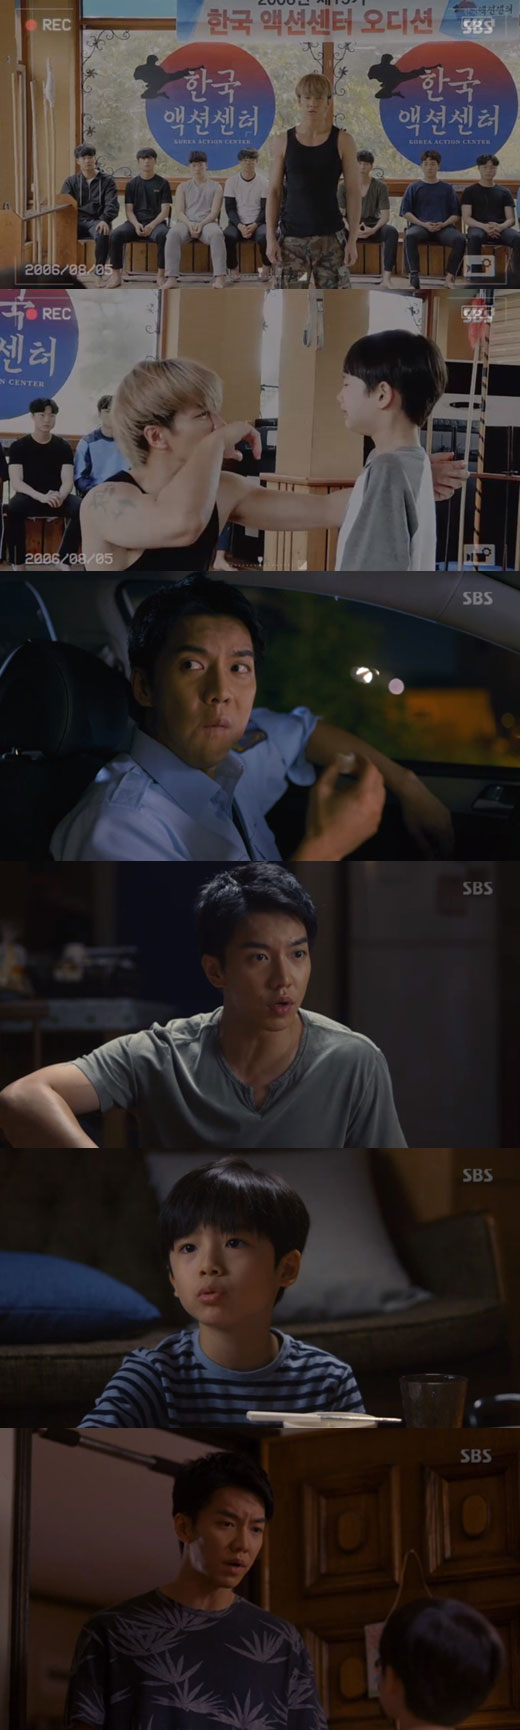 Actor Lee Seung-gi and Bae Suzy have raised the expectation of Vagabond with a perfect casting combination.The SBS gilt drama Vagabond (playplayed by Jang Young-chul, directed by Yoo In-sik) aired on the night of the 20th opened the curtain of First Broadcast Song with a magnificent scale.On the day of the broadcast, Planes terrorist accidents occurred in a huge conspiracy between Cheong Wa Dae and companies, and Lee Seung-gis nephew Hun lost his life and predicted a full-scale story.Lee Seung-gi is currently working as a pick-up knight, but he is originally a stuntman. He showed excellent action by playing the role of a chadal-gun, which is not a fire for his nephew.Chadalgan arrived at Morocco together to host a memorial service with the families who lost their families in the Planes attack.Then Chadalgan found a terrorist in a cloud video accidentally left by his nephew Hoon in the toilet at Morocco Airport and immediately followed him.The scene of Vagabond episode 1, which caused tension to the point of inseparable, was unfolded here.Cha Dal-gun, who chased the terrorists, faced terrorists in the alley, and Cha Dal-gun said, I heard that all the people in the Planes are dead. How are you alive?We killed Hoon, why did you drop Planes? he shouted, angry.The chase against terrorists and the chase against Morocco was so big that it seemed to be a movie.Lee Seung-gis action and emotion were flawless and perfect.Bae Suzy (Gohari) appeared implicitly as an NIS black agent who is spying at the Morocco embassy.In the first episode, Lee Seung-gi was the center of the incident, but it was expected to play a full-fledged role in encountering Lee Seung-gi in Morocco.Bae Suzy is divided into a role of a scrambling and shrewd intern in the embassy, but soon he was able to feel a stable performance in the way he performed the NIS mission with a cool face with a completely changed expression.In the early days of the broadcast, Lee Seung-gi was impressed with the image of a goddess reminiscent of a pictorial in every scene where Bae Suzy appeared, such as a scene caught in the range of guns aimed at, a scene of shooting practice, and a scene of performing a sly performance to embassy staff, saying that he was changing stockings.It was another attraction that was as pleasant as Lee Seung-gis action.In addition to the performances of the main actors, Vagabond attracted a lot of favorable responses with the realistic visual beauty, solid cast, and interesting development of 25 billion won production cost.